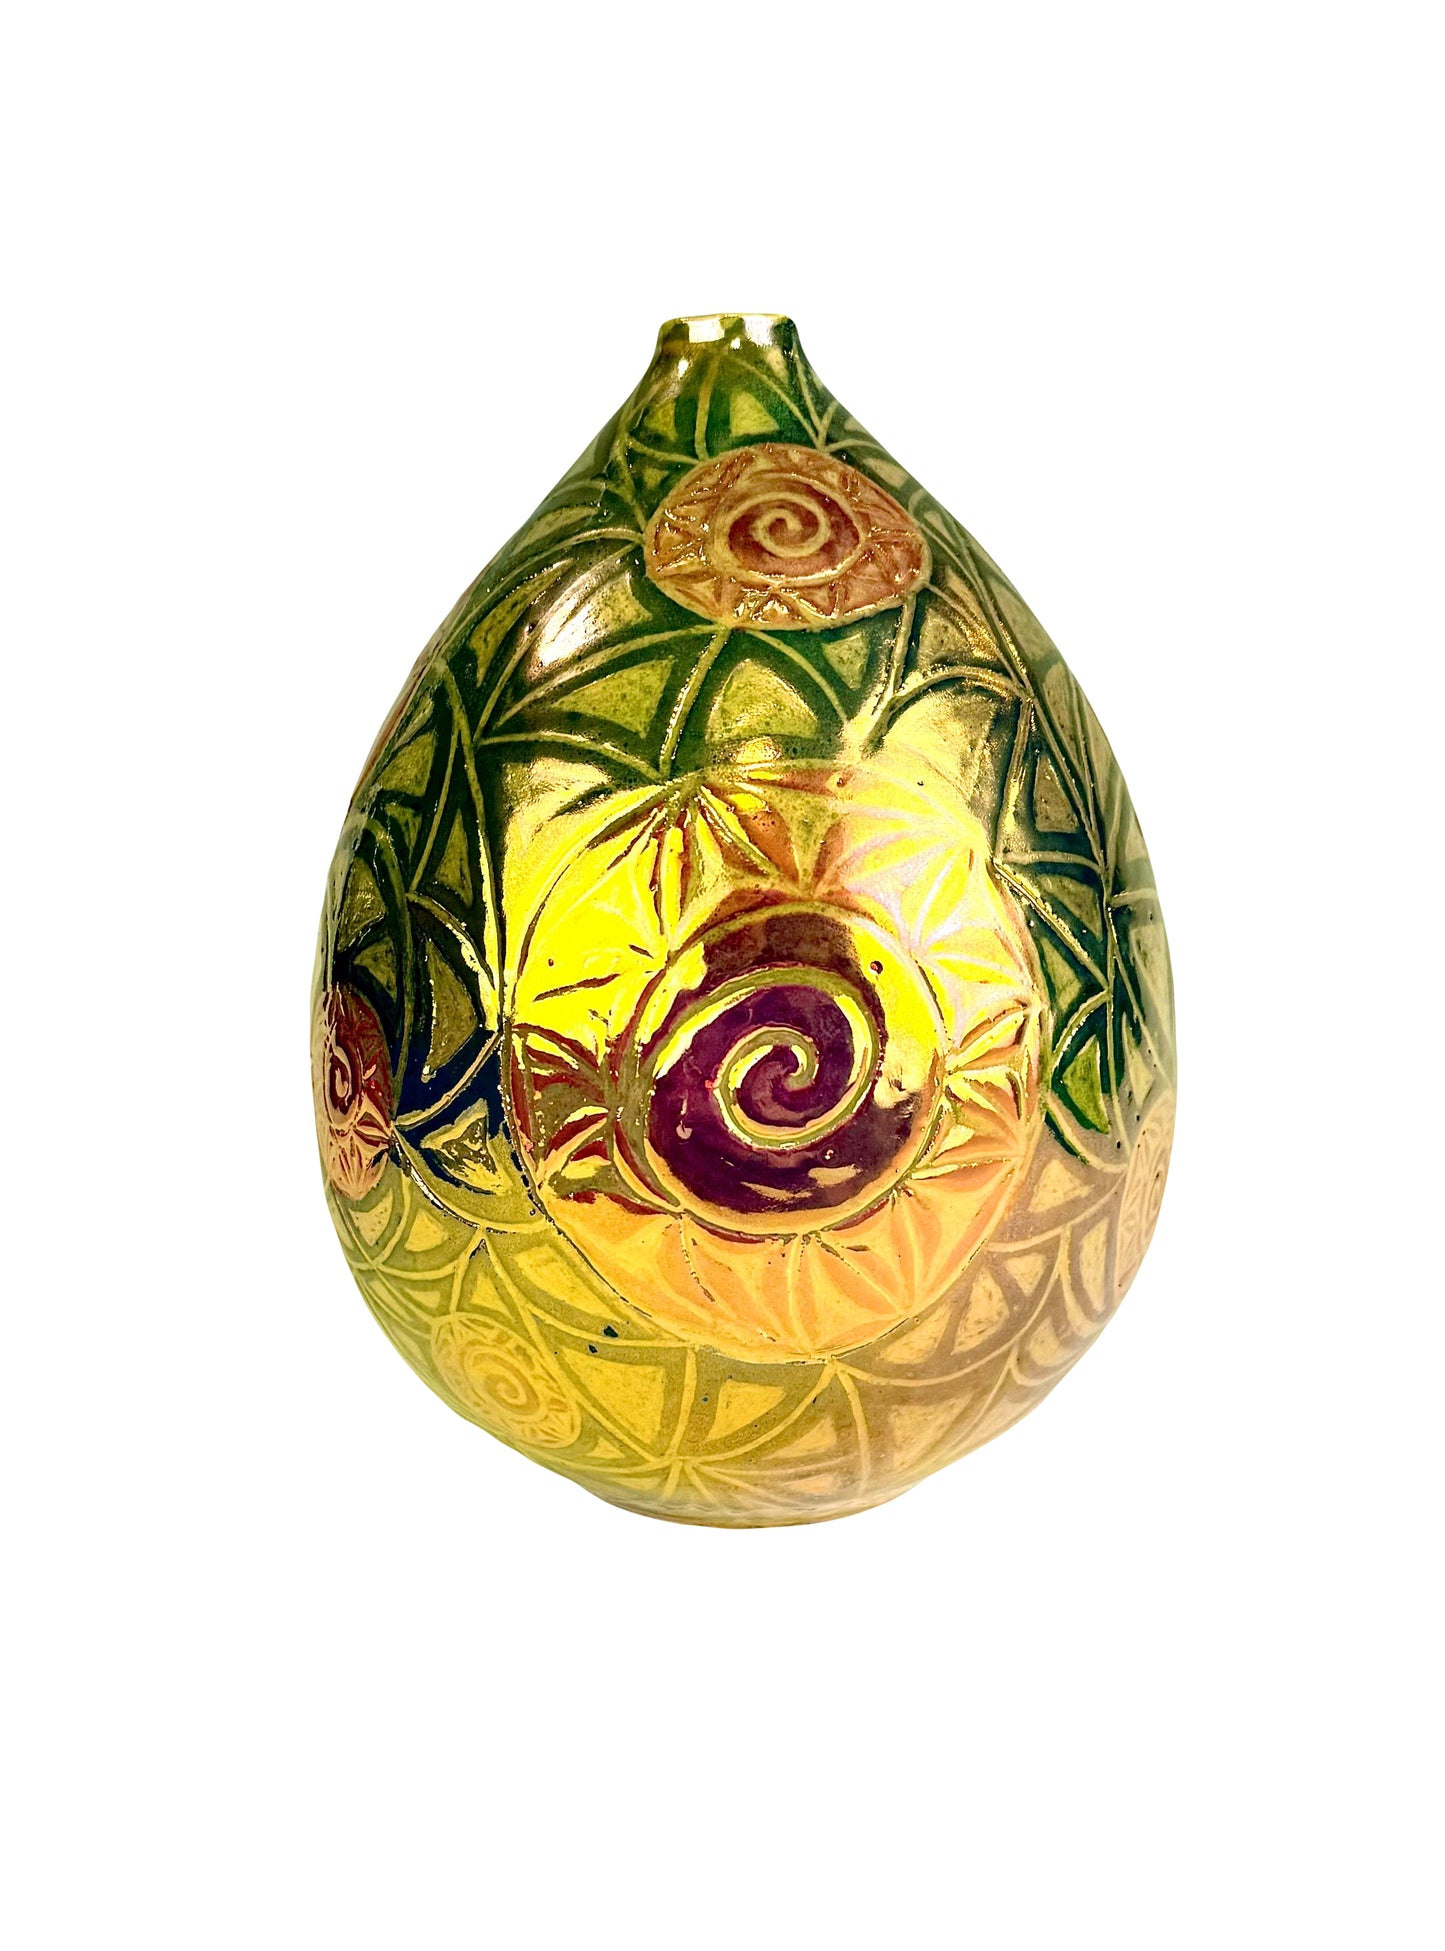 Gold Luster Vase with Colored Engobes and a Sgraffito Swirl Design